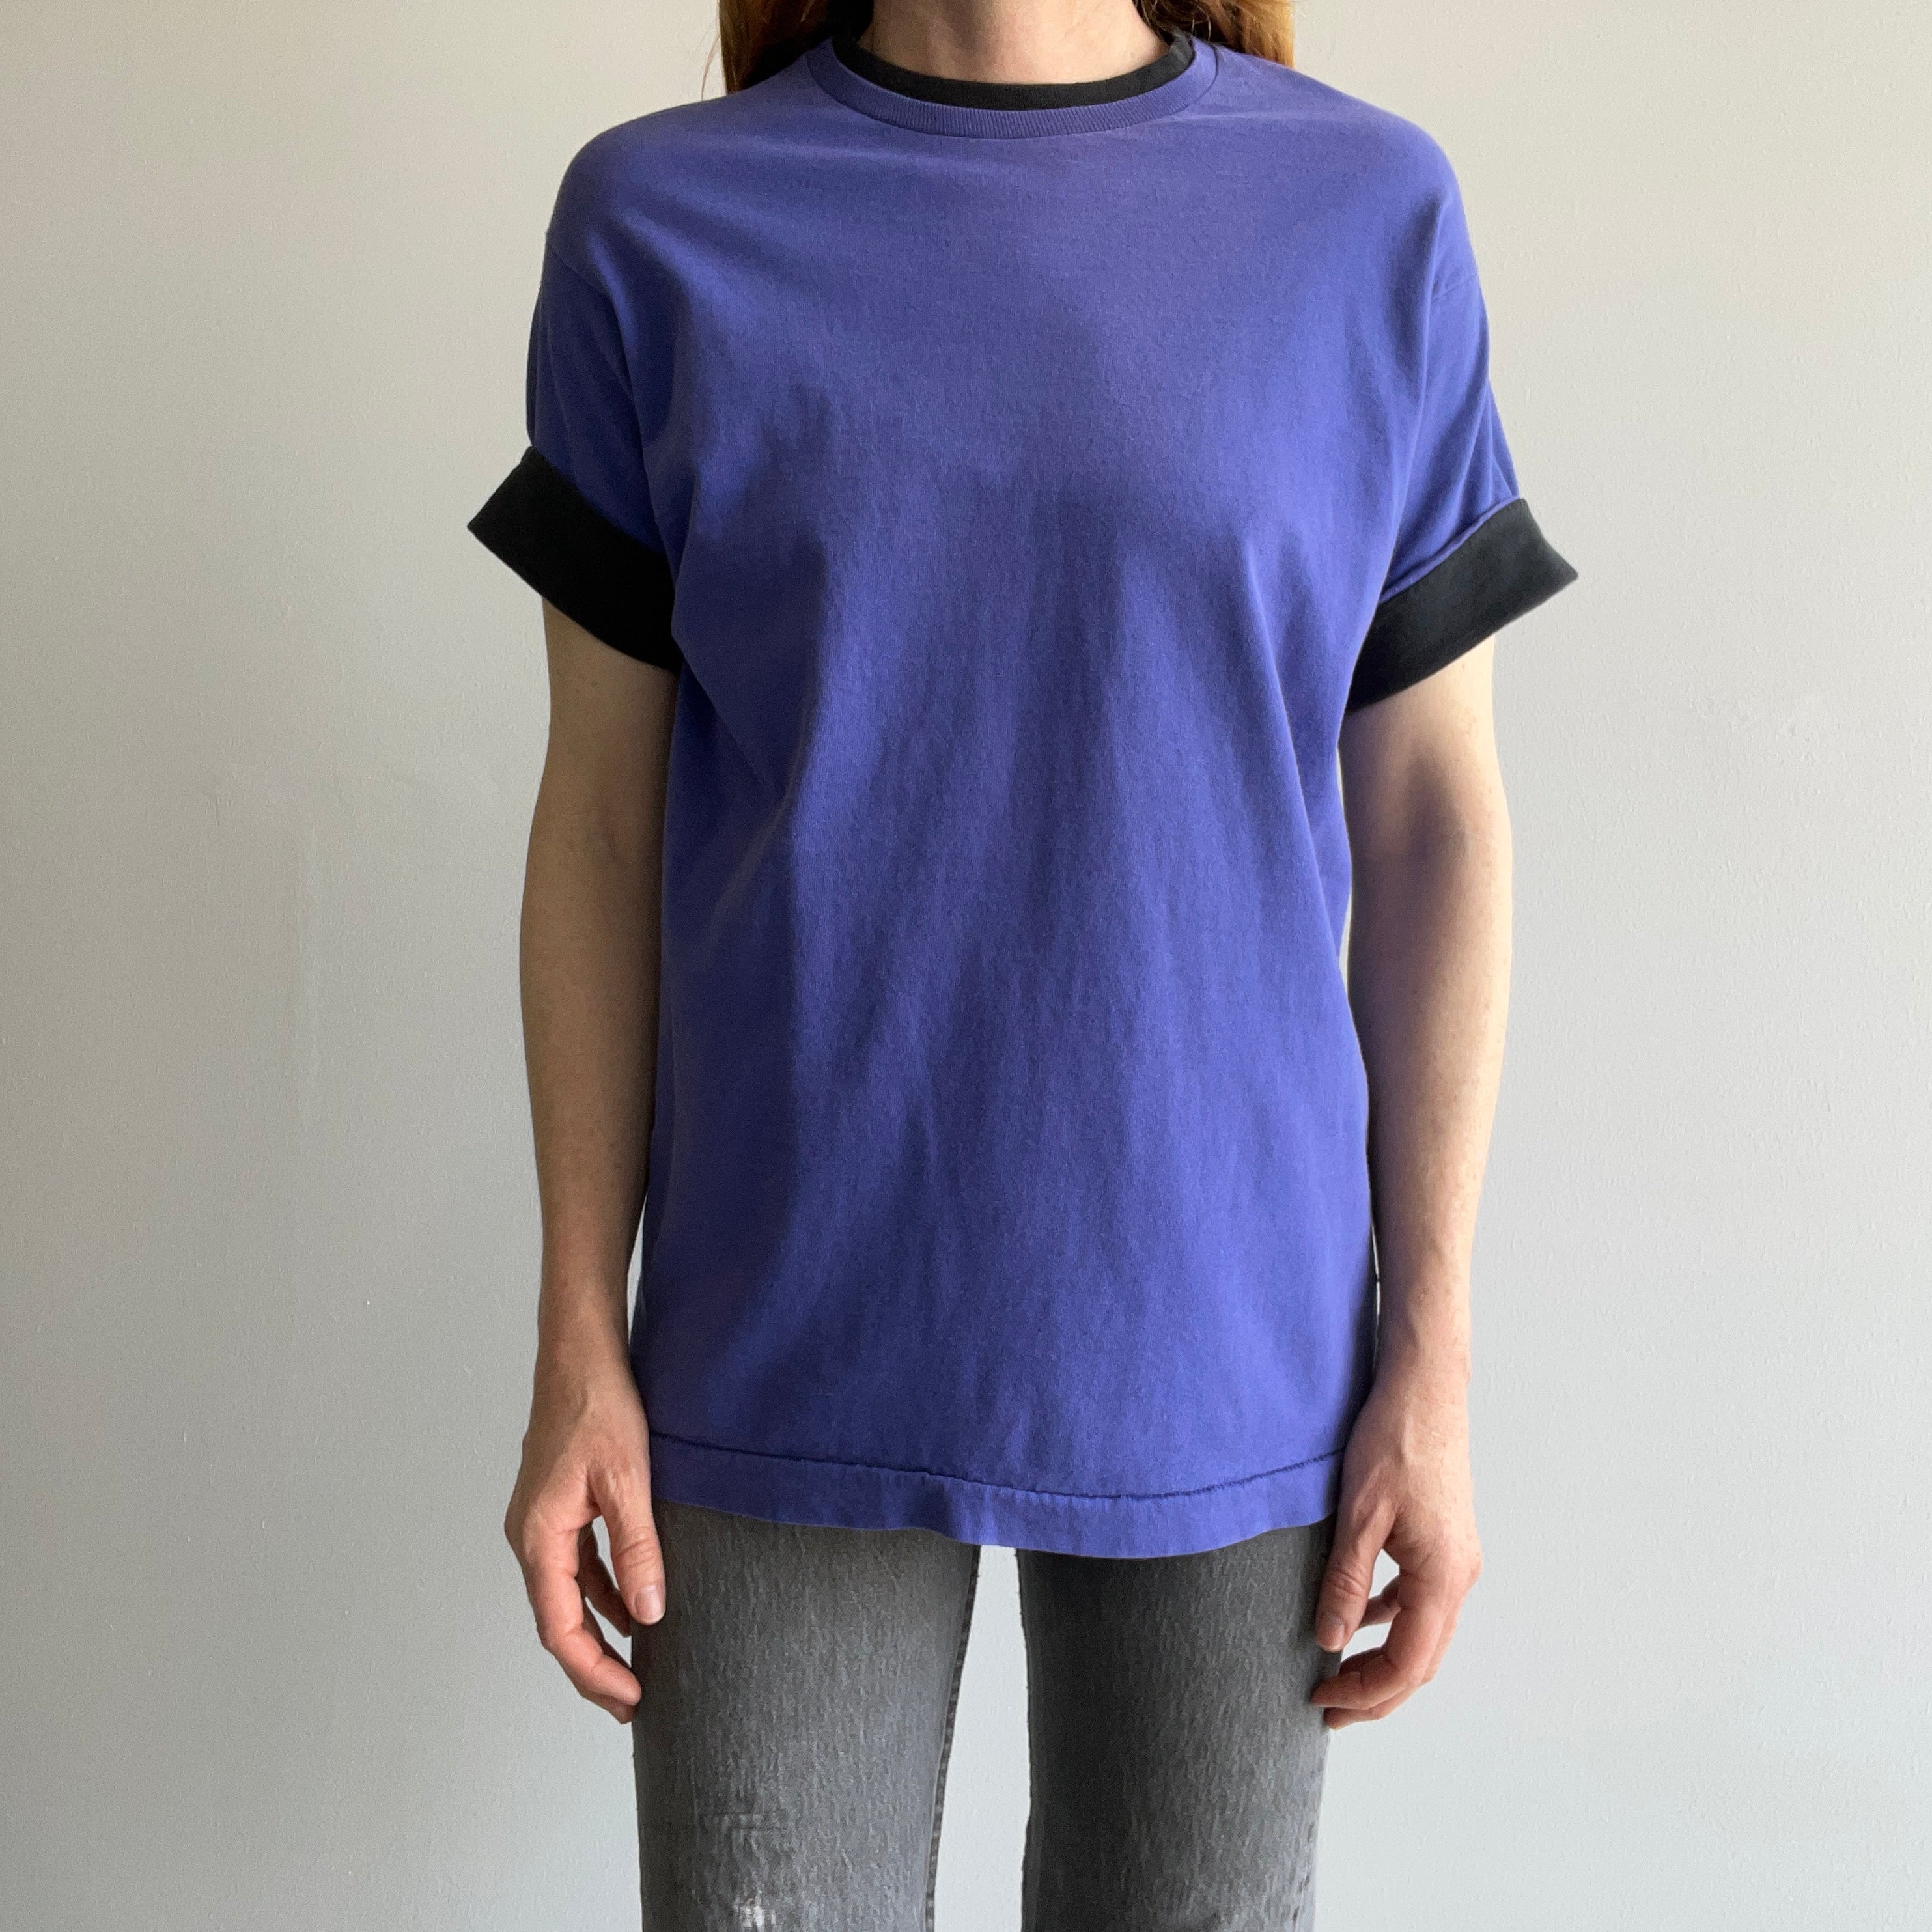 1980s Indigo/Blue/Purple and Black Two Tone Rolled Sleeve Beauty